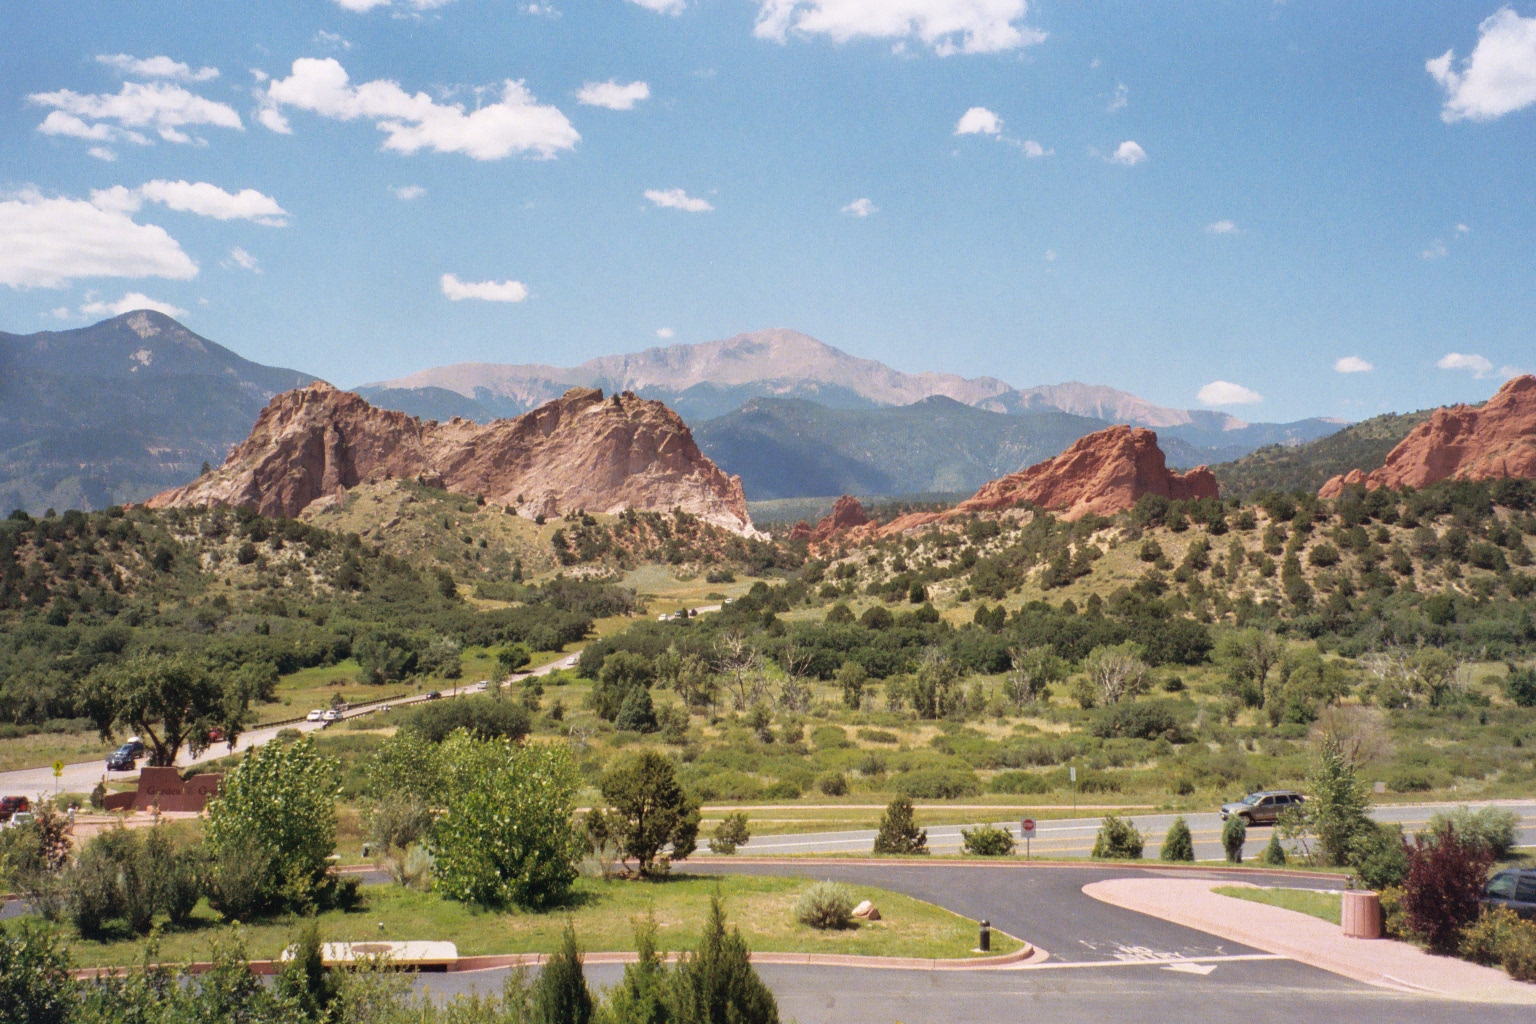 Huh, that rather looks like the Garden of the Gods in Colorado Springs. 